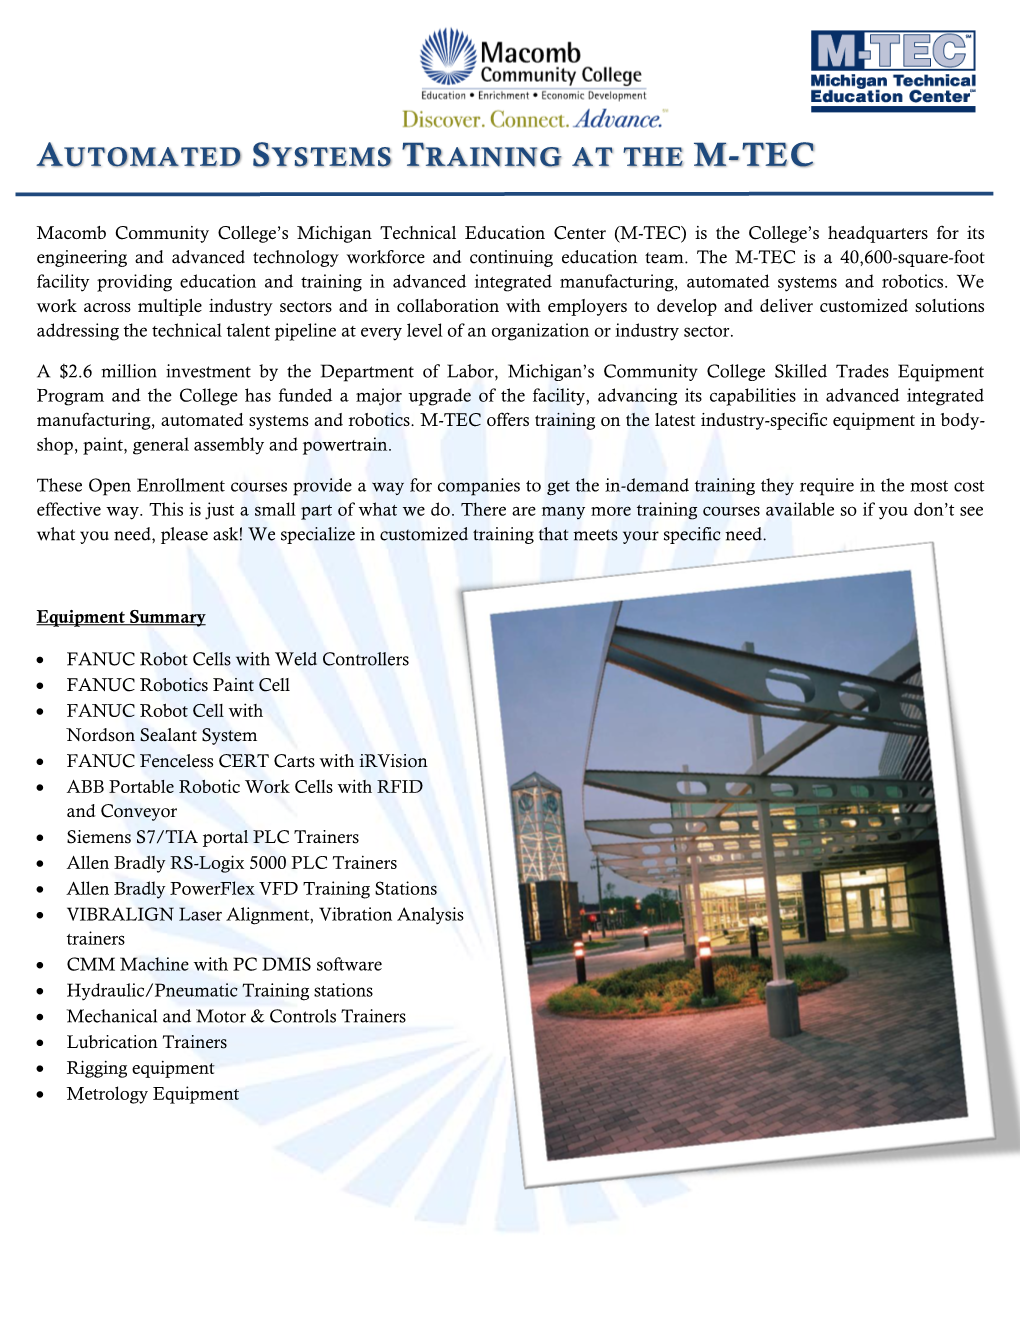 Automated Systems Training at M-TEC